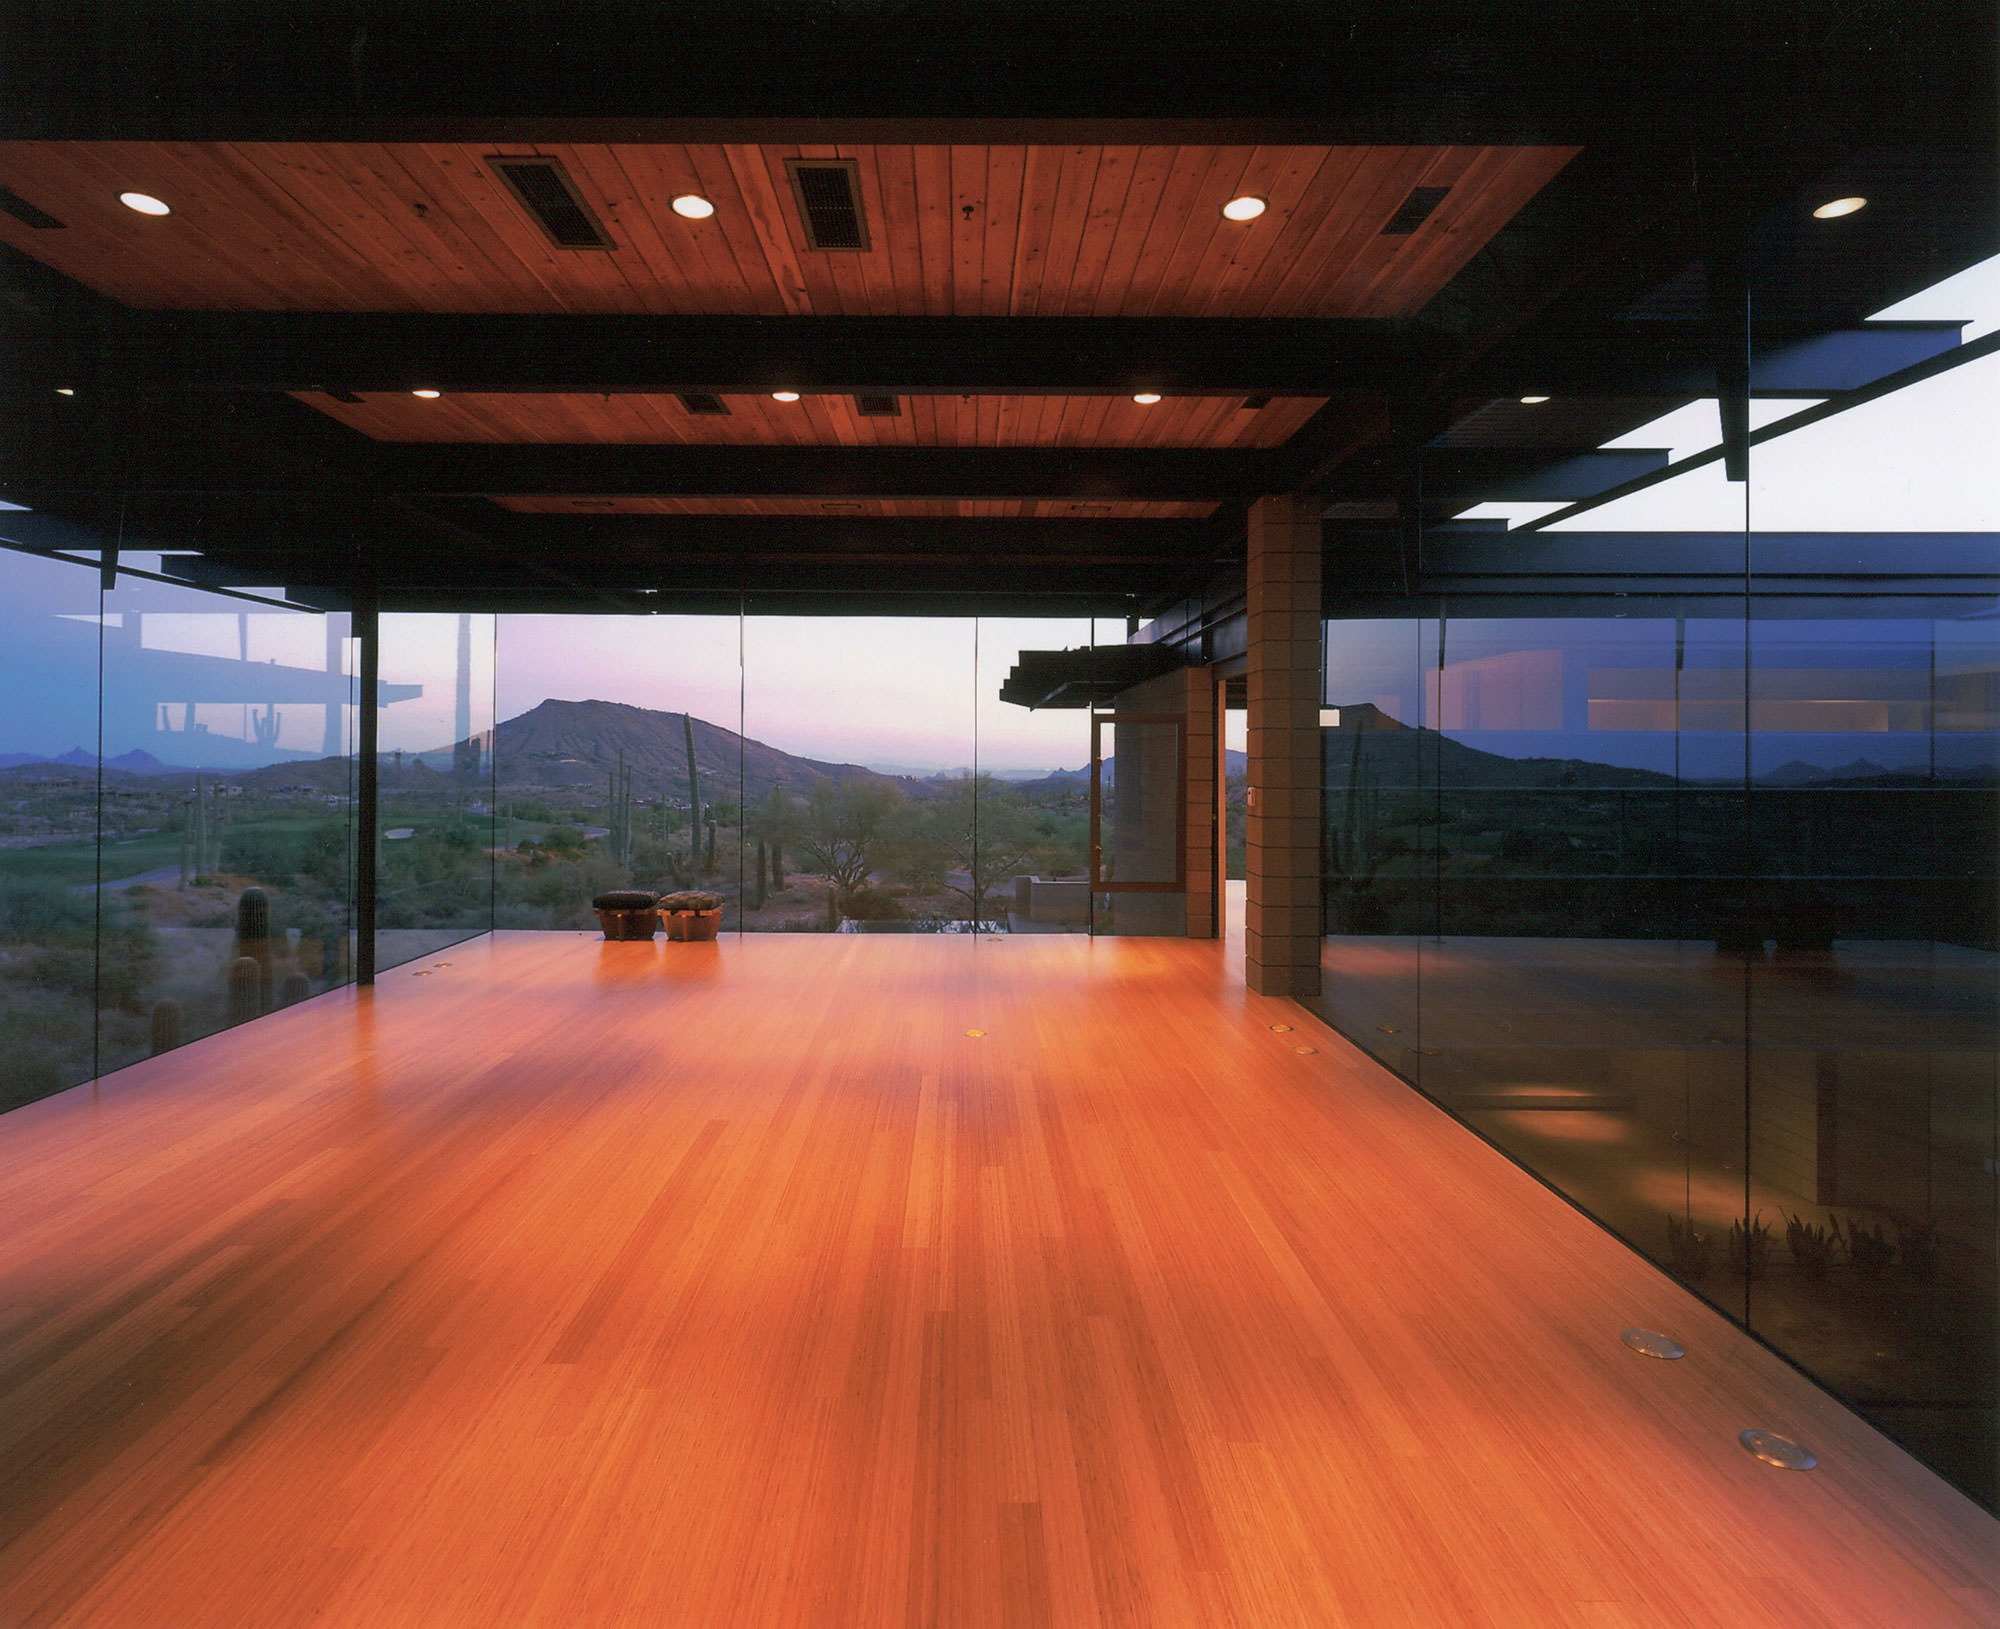 A tranquil corner of the home looks out through glass curtainwalls to the sprawling desert landscape at dusk.